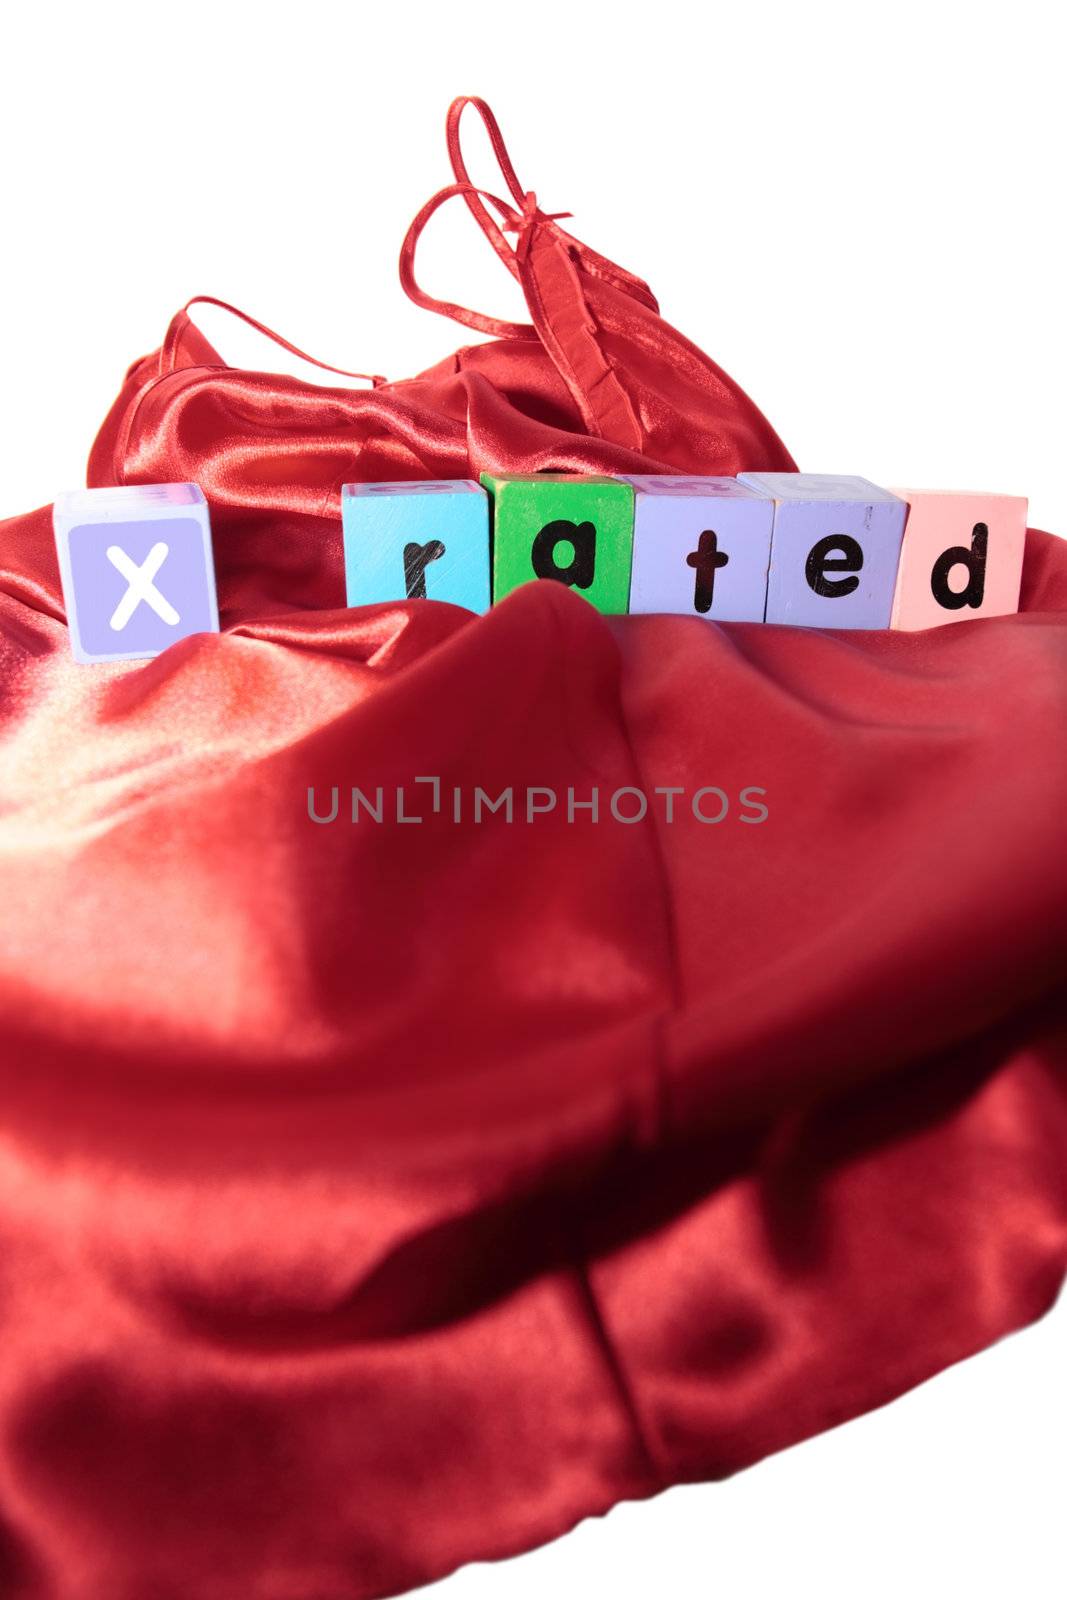 x rated written with blocks on a silk nightie against white background